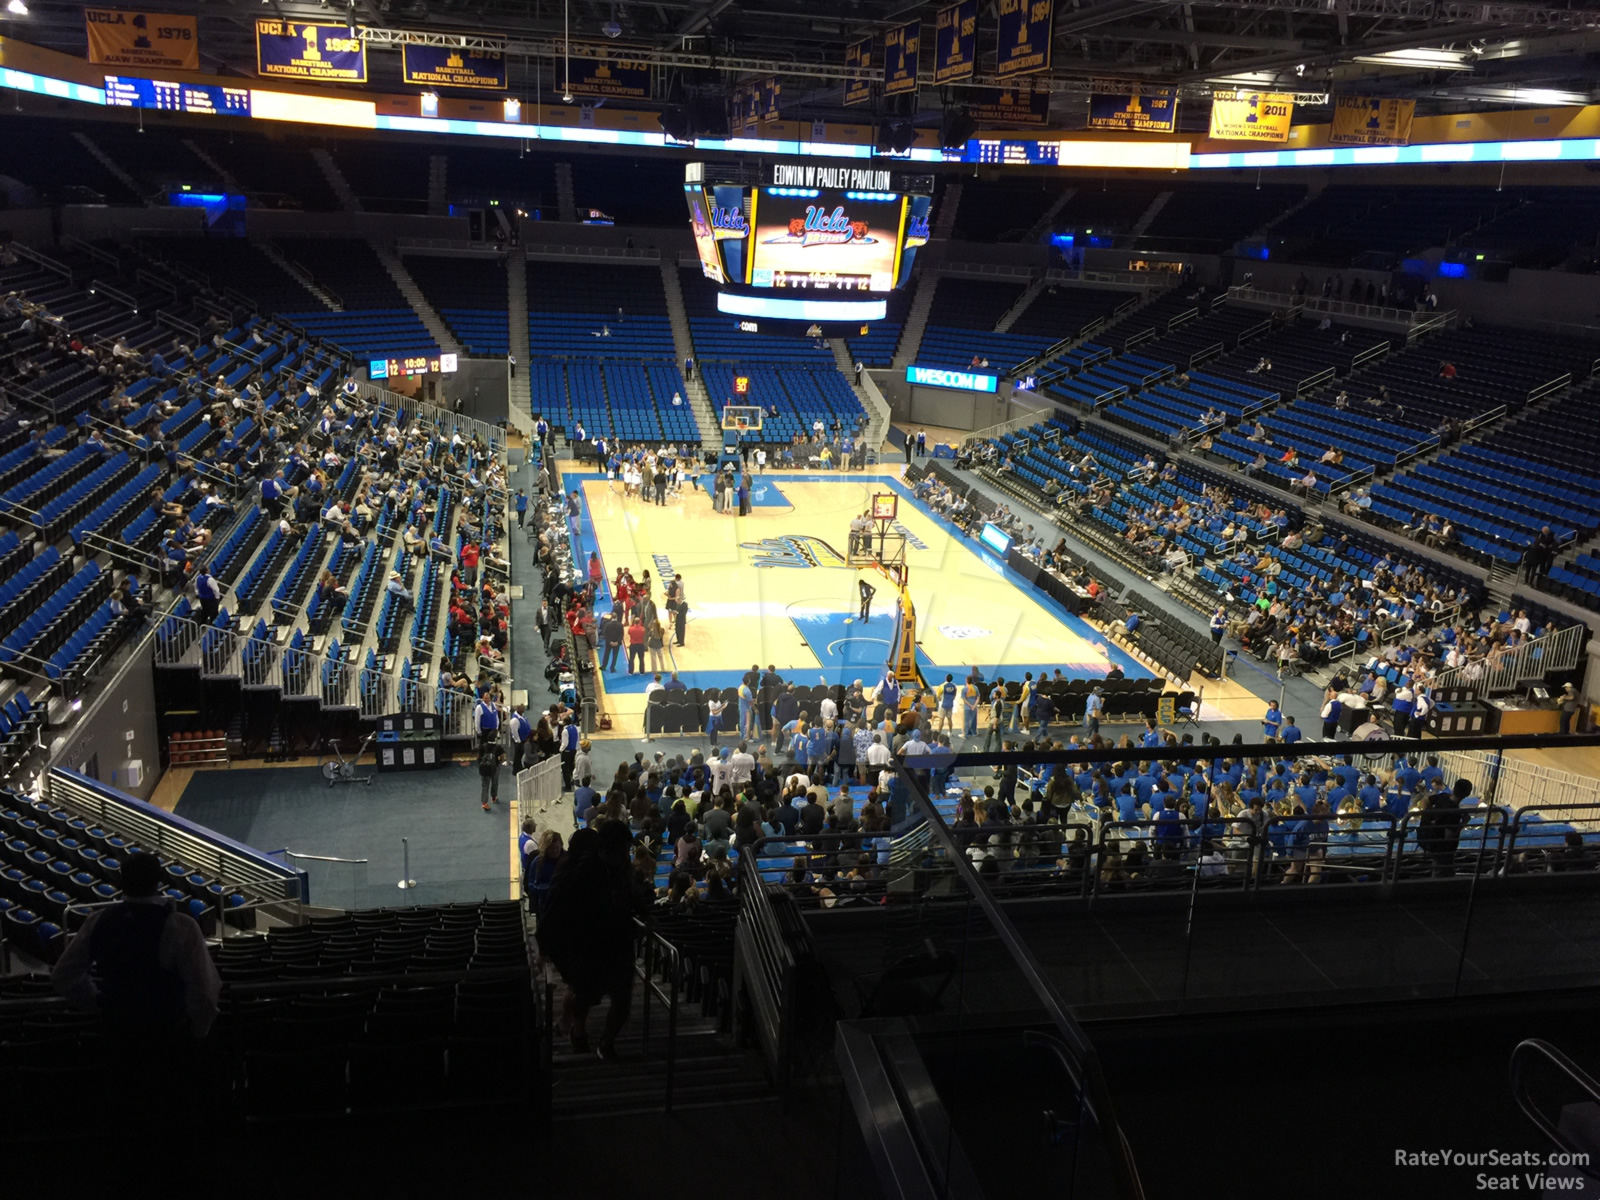 section 223a, row 6 seat view  - pauley pavilion